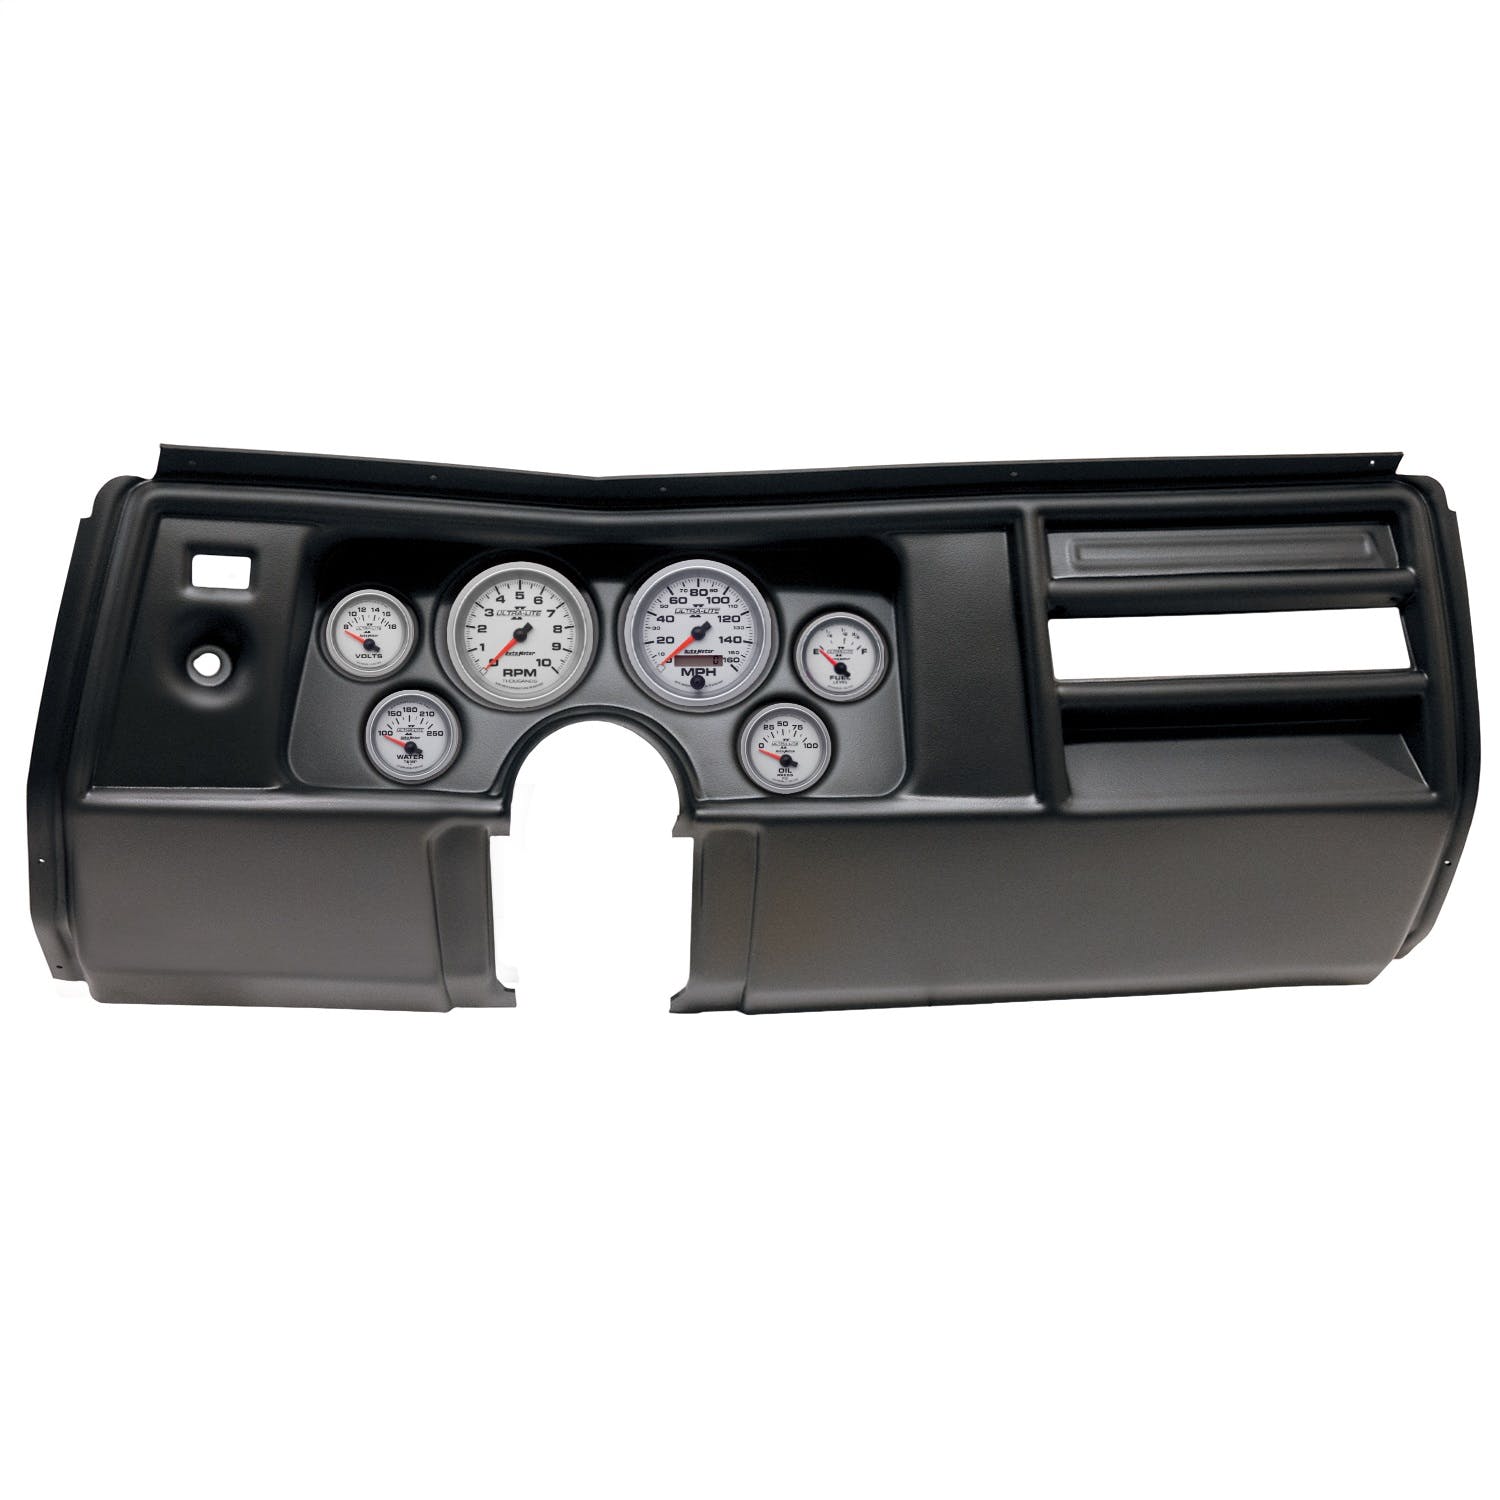 AutoMeter Products 2908-14 6 Gauge Direct-Fit Dash Kit, Chevy Chevelle No Vent 69, Ultra-Lite II